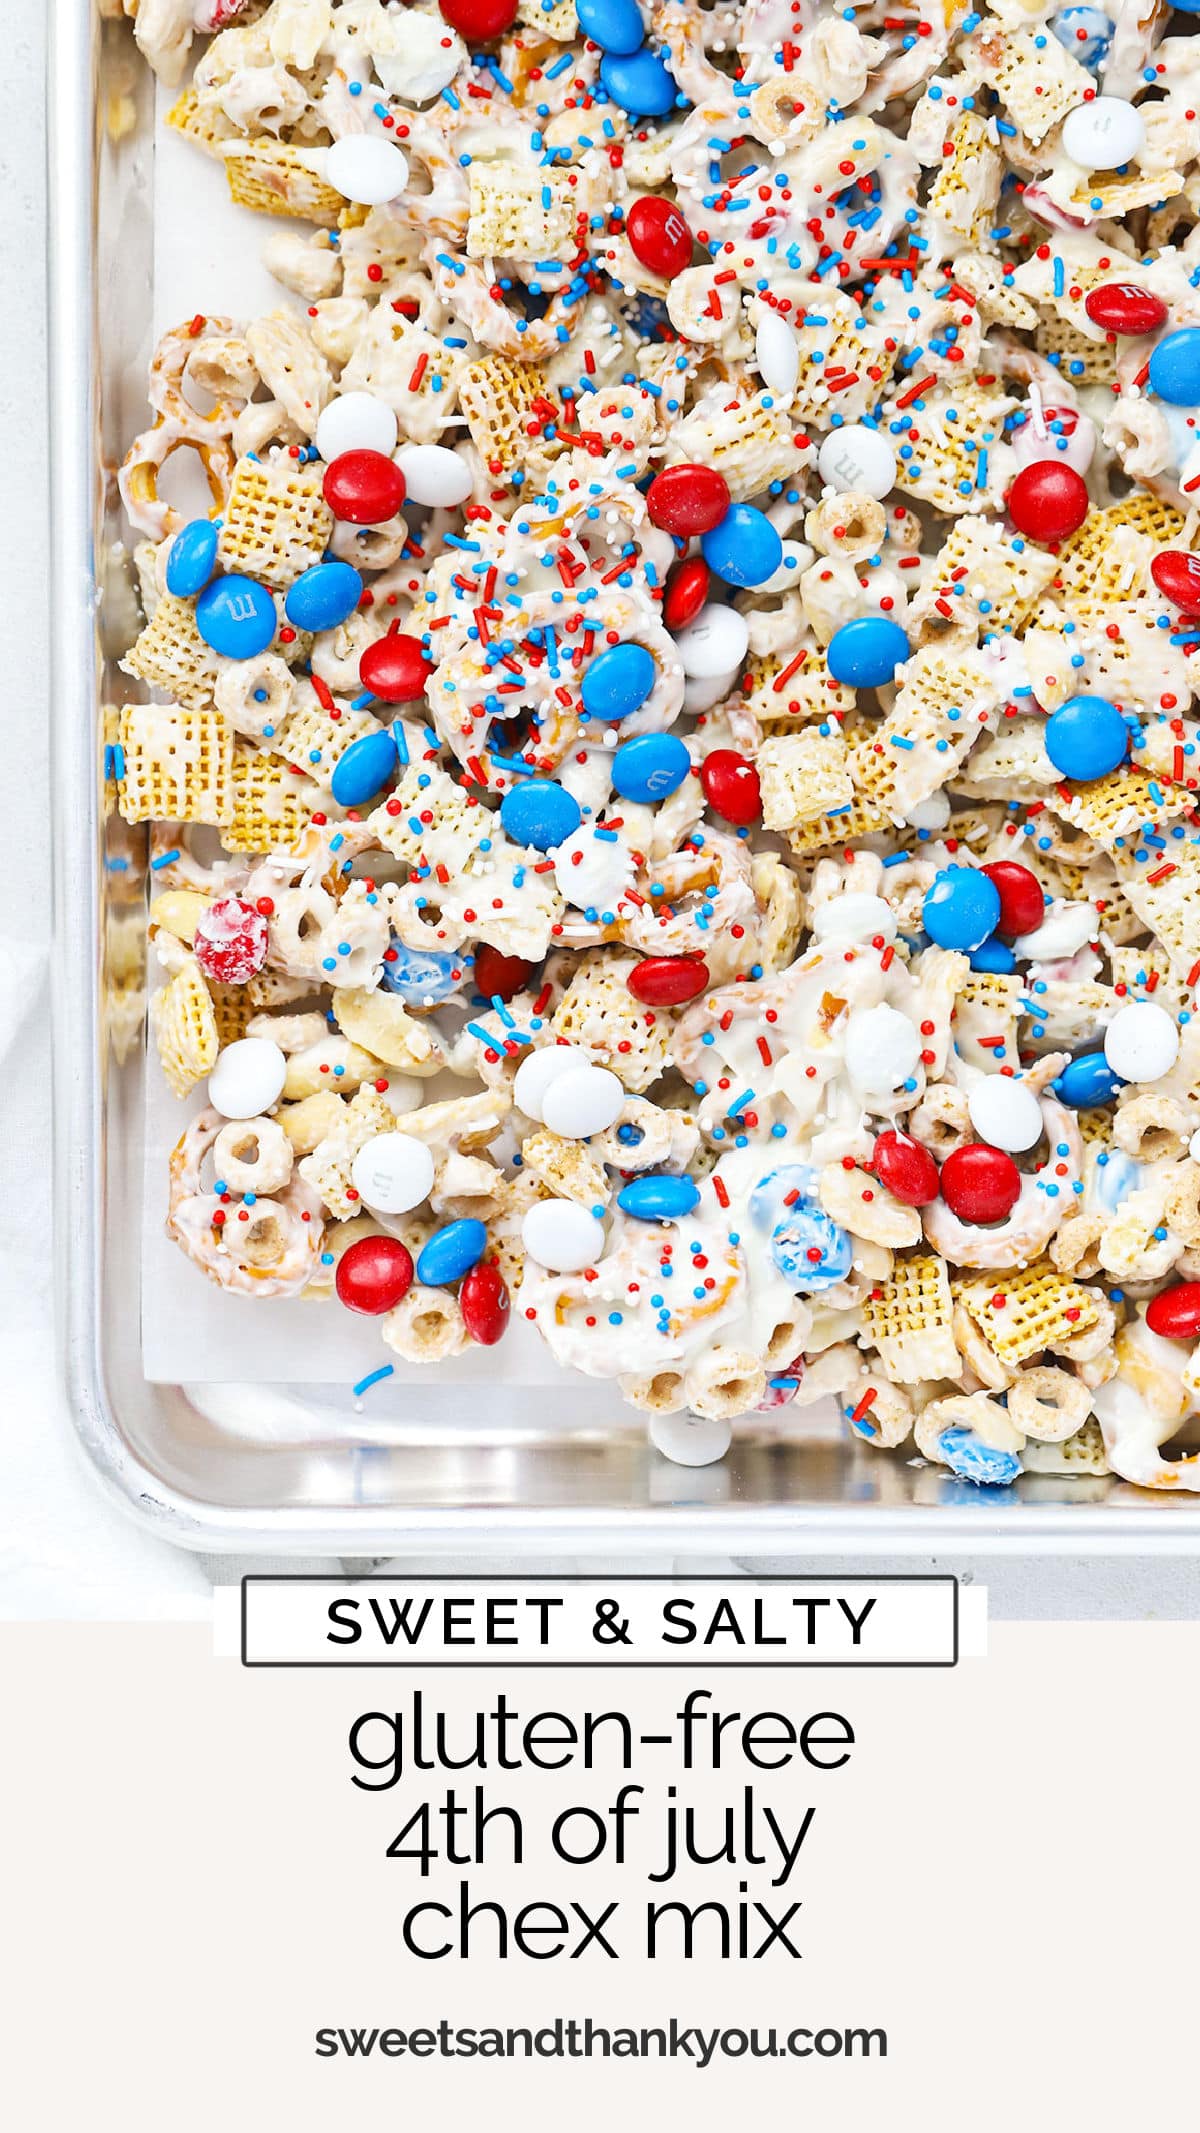 This crispy, crunchy Gluten-Free 4th of July Chex Mix recipe is an easy red, white, and blue treat for summer. Try it for summer BBQs, game or movie nights, pool parties & more! / red white blue chex / red white and blue chex mix / red white and blue snack mix / gluten free 4th of july snack mix / gluten free 4th of july dessert / gluten free no bake dessert / patriotic snack mix / patriotic chex mix / summer snack mix / summer dessert